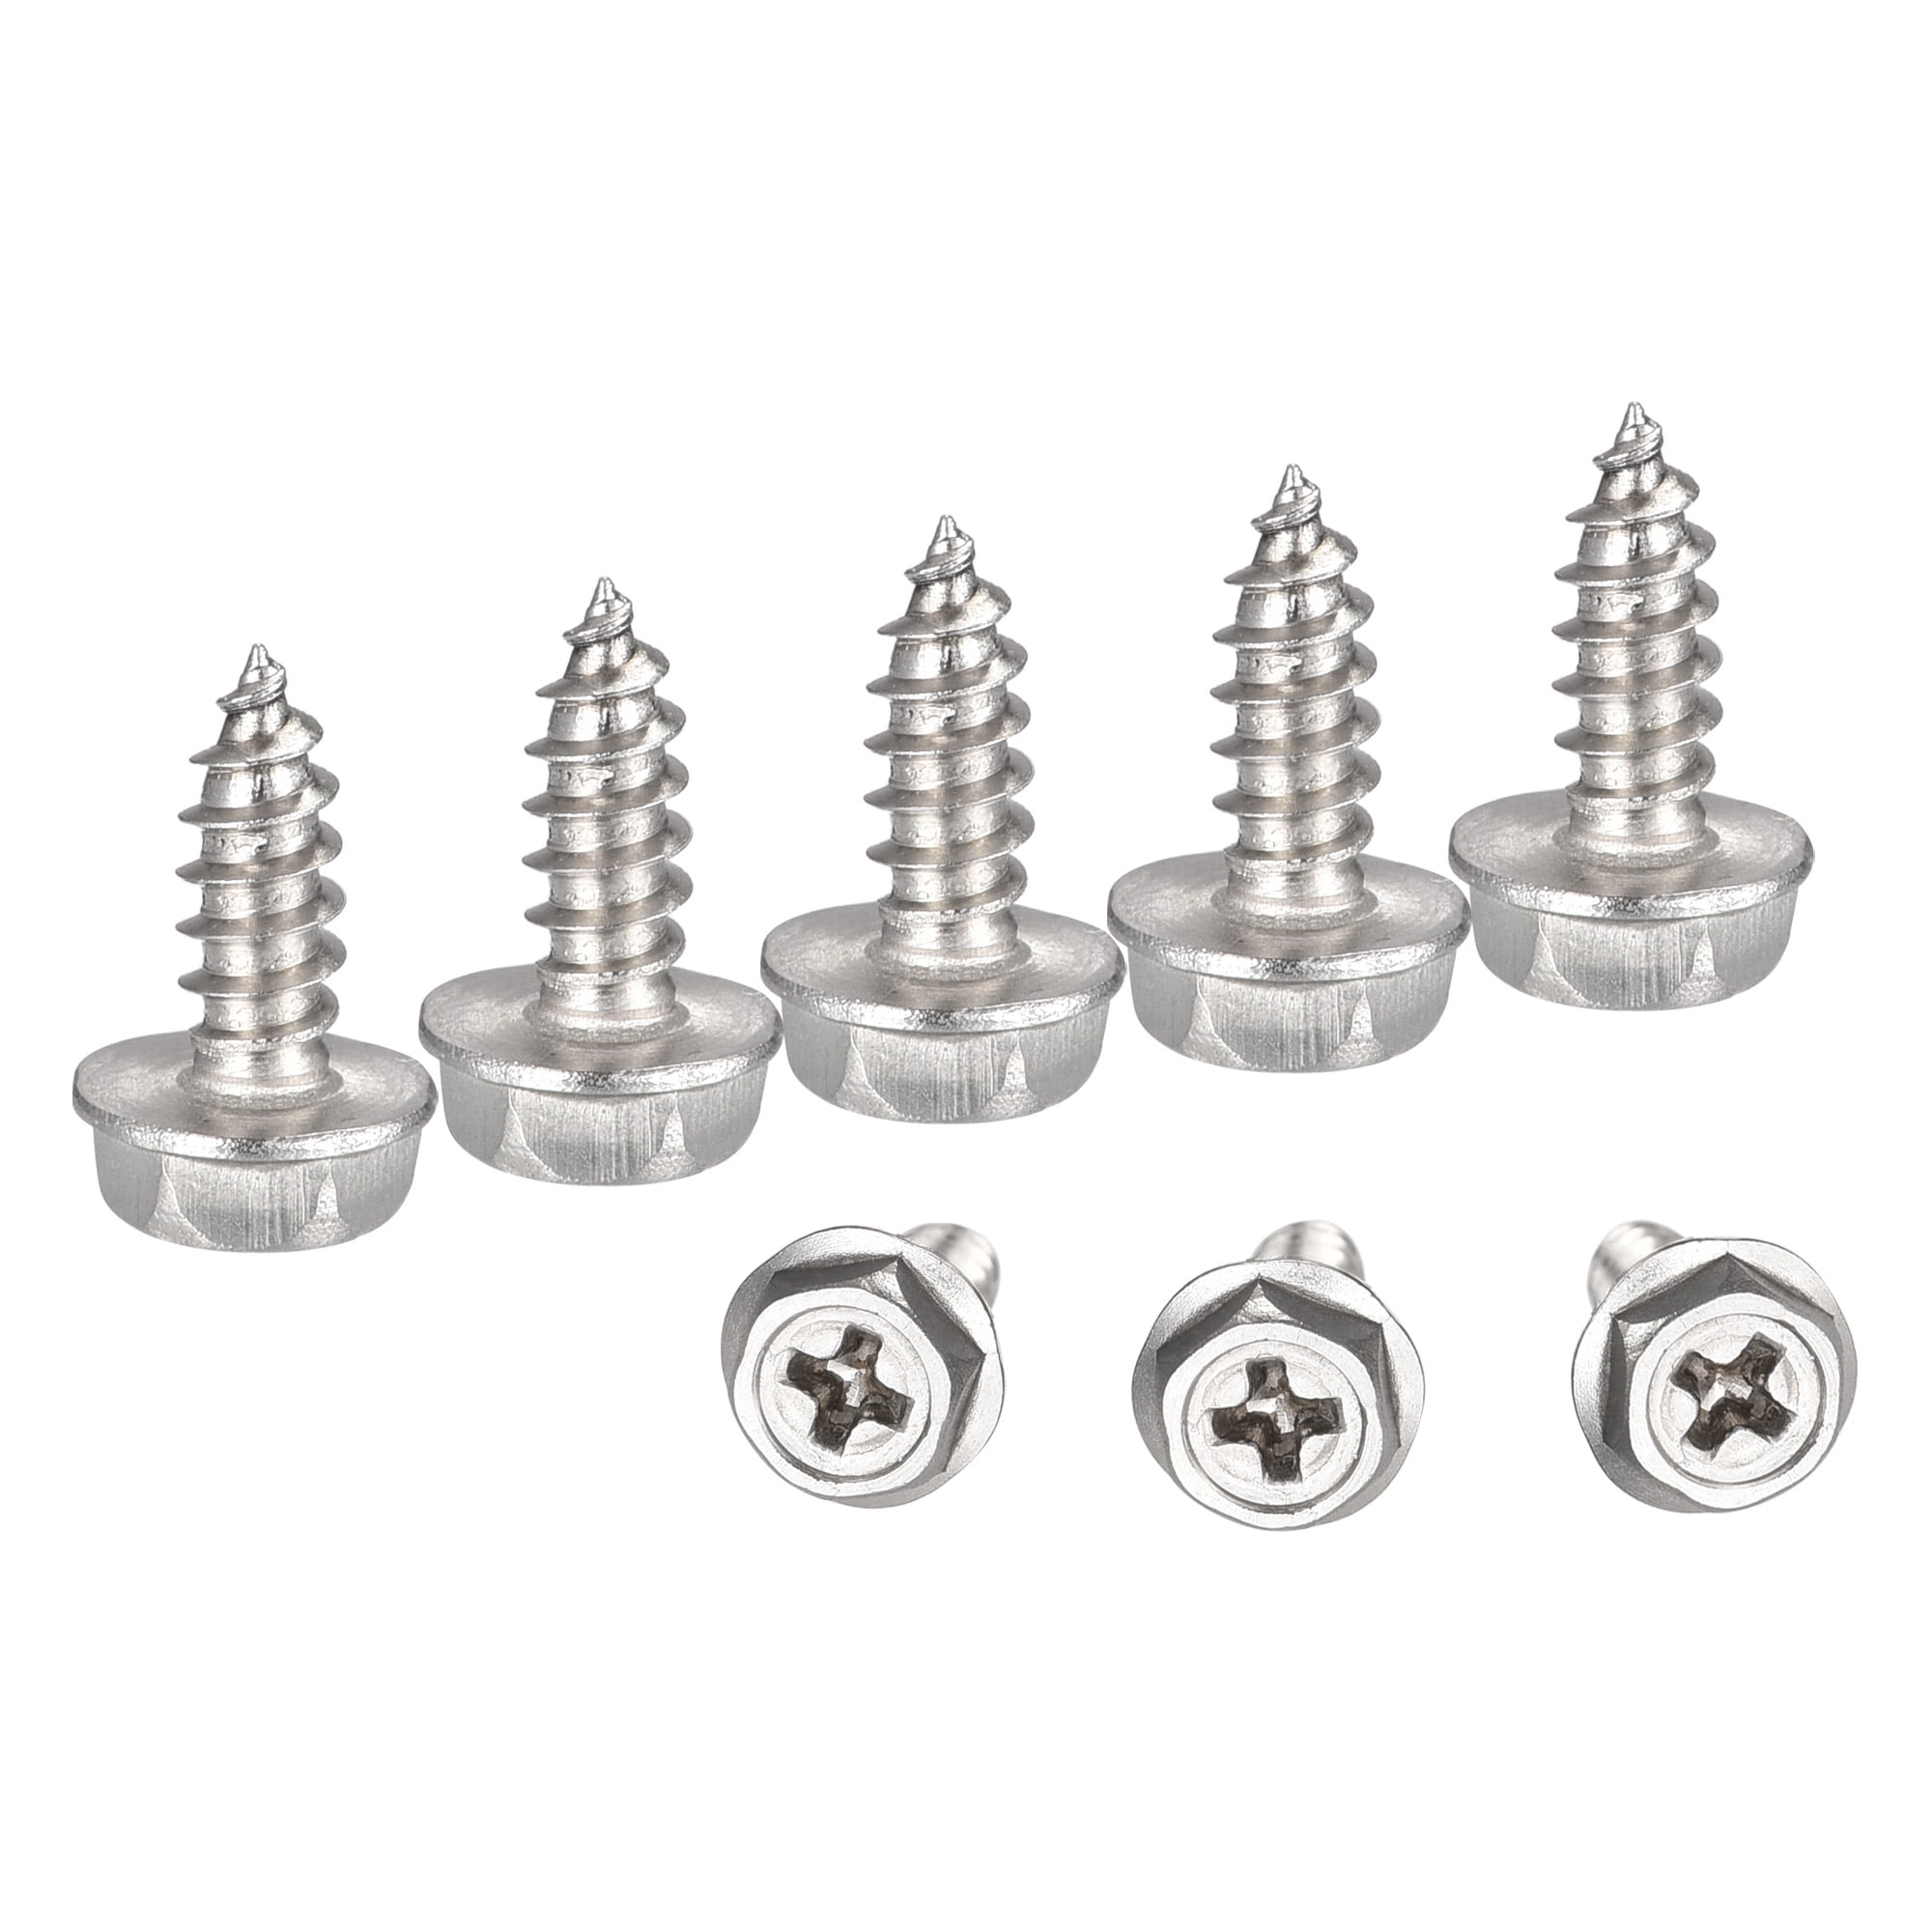 uxcell M4x16mm 304 Stainless Steel Phillips Round Pan Head Self Tapping Screws 50pcs 